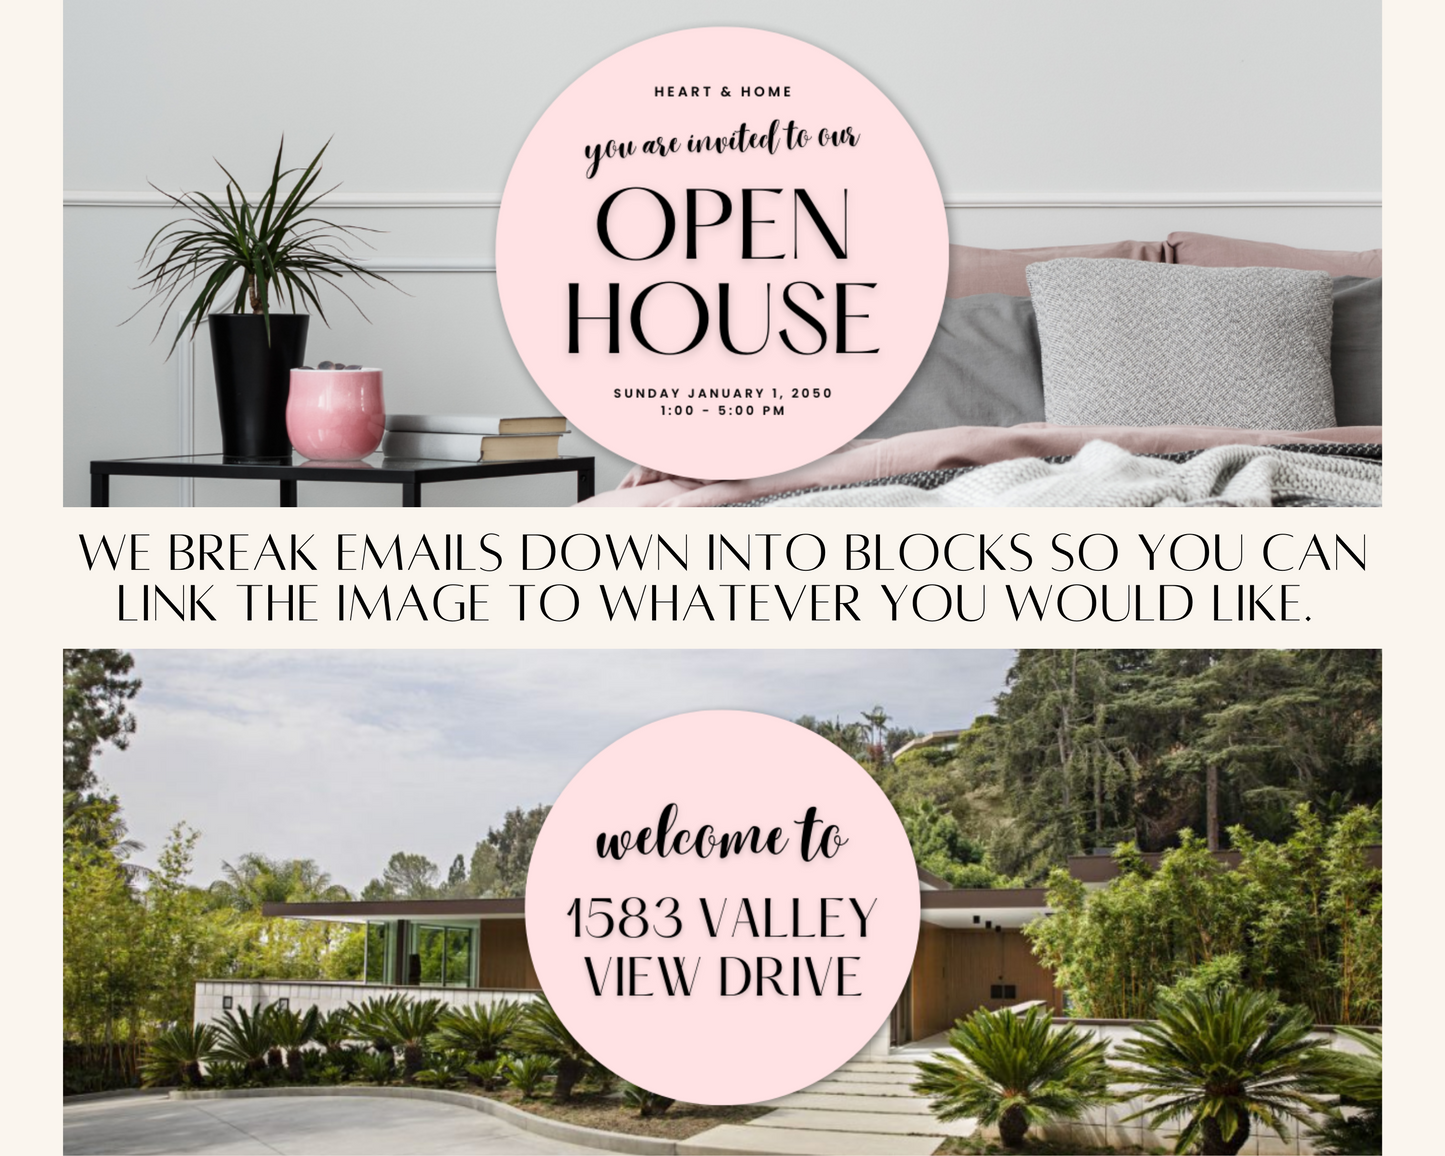 Open House Email Playful